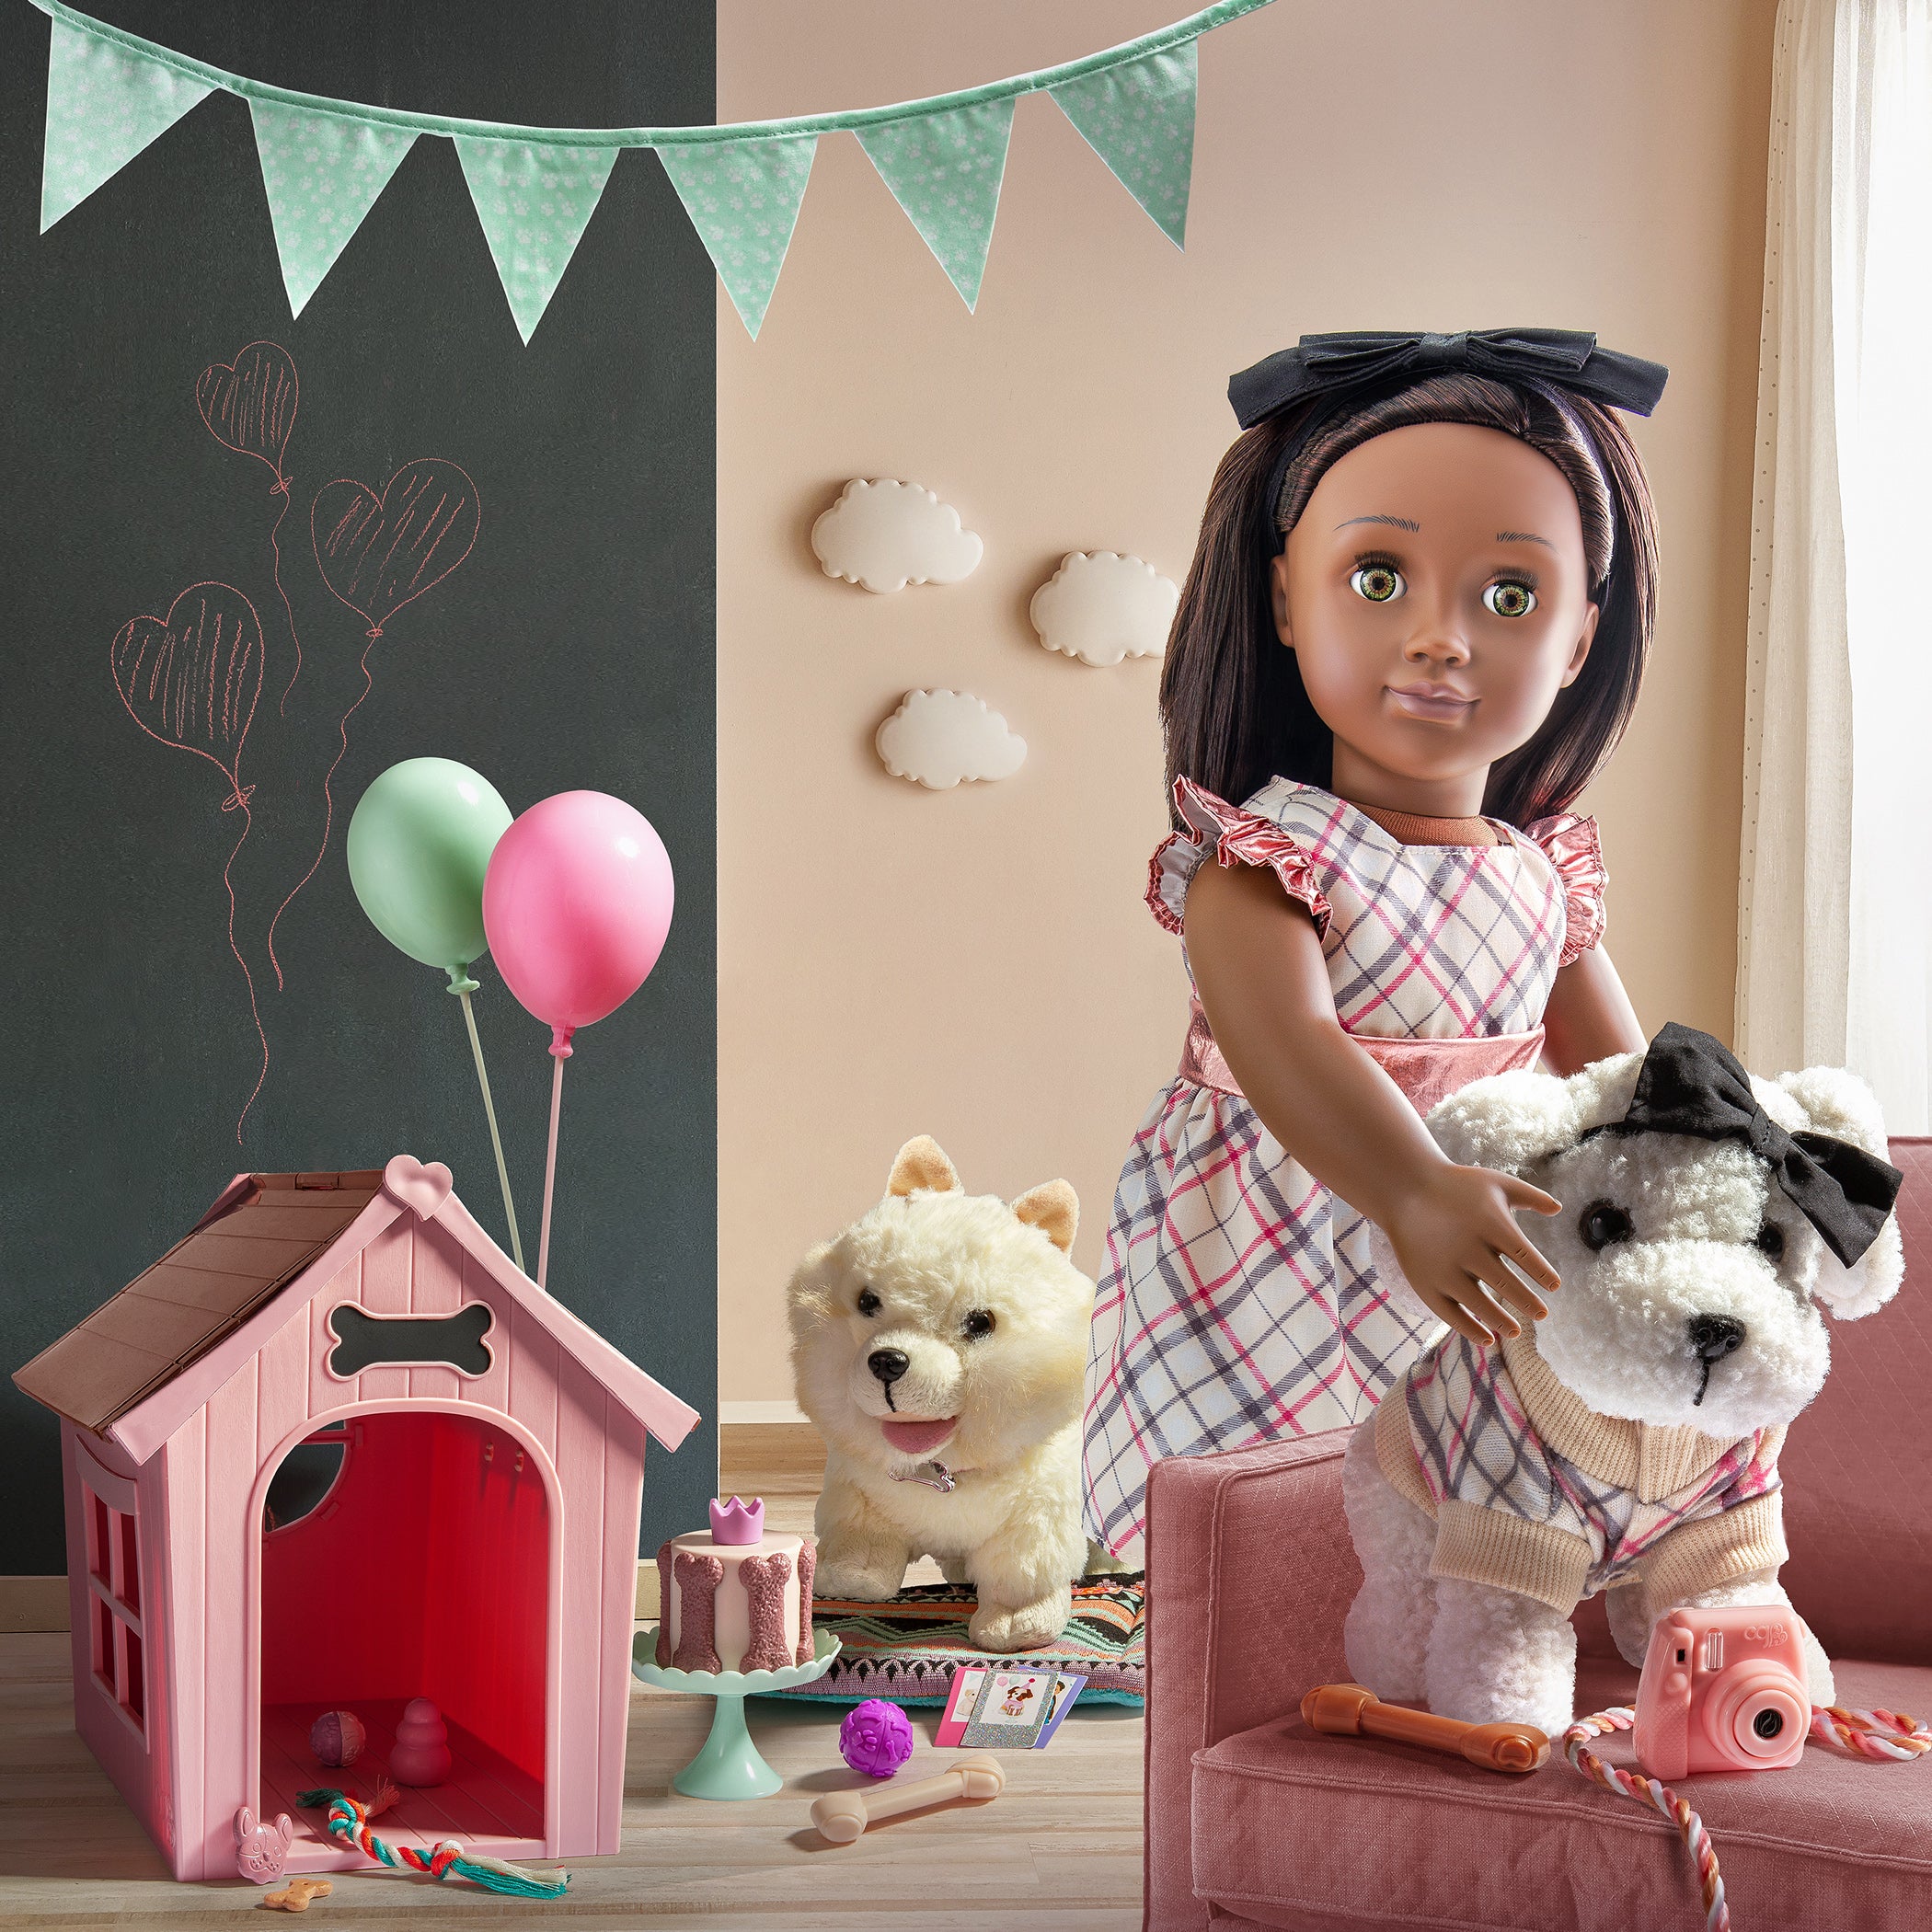 Doll with two stuffed animal dog pets